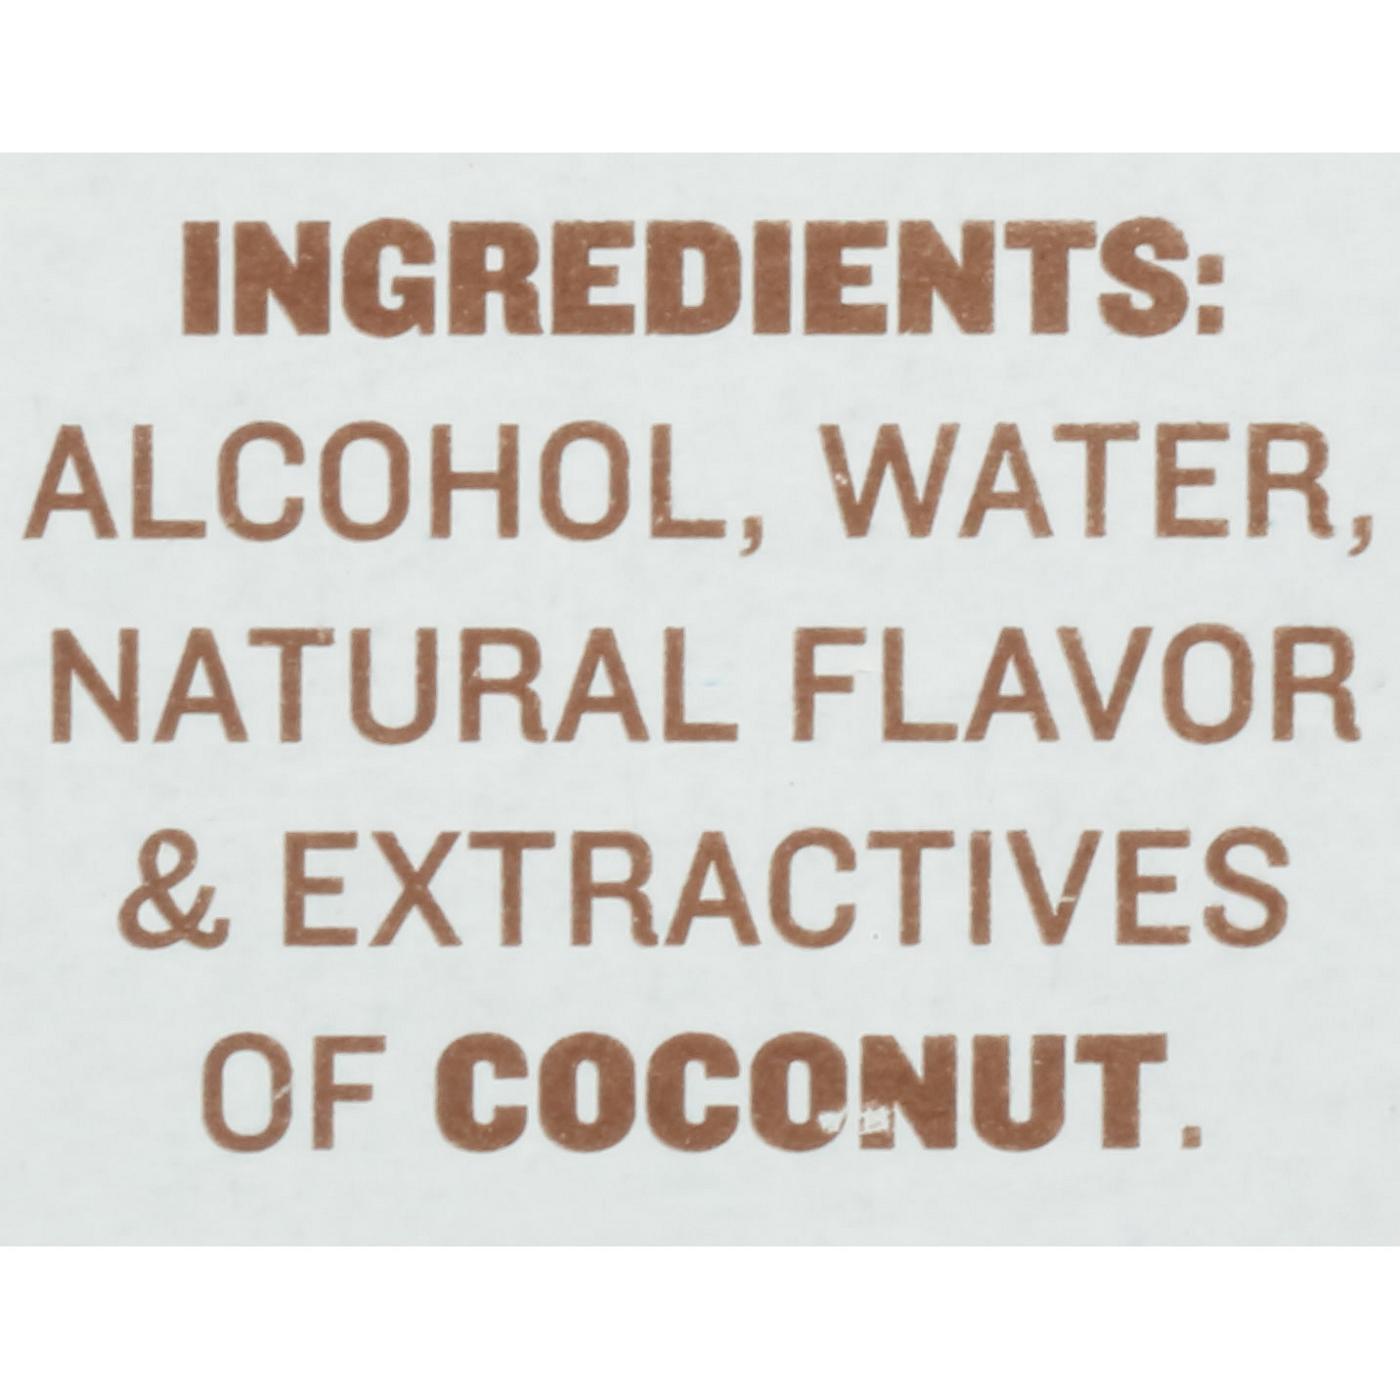 McCormick Coconut Extract; image 6 of 8